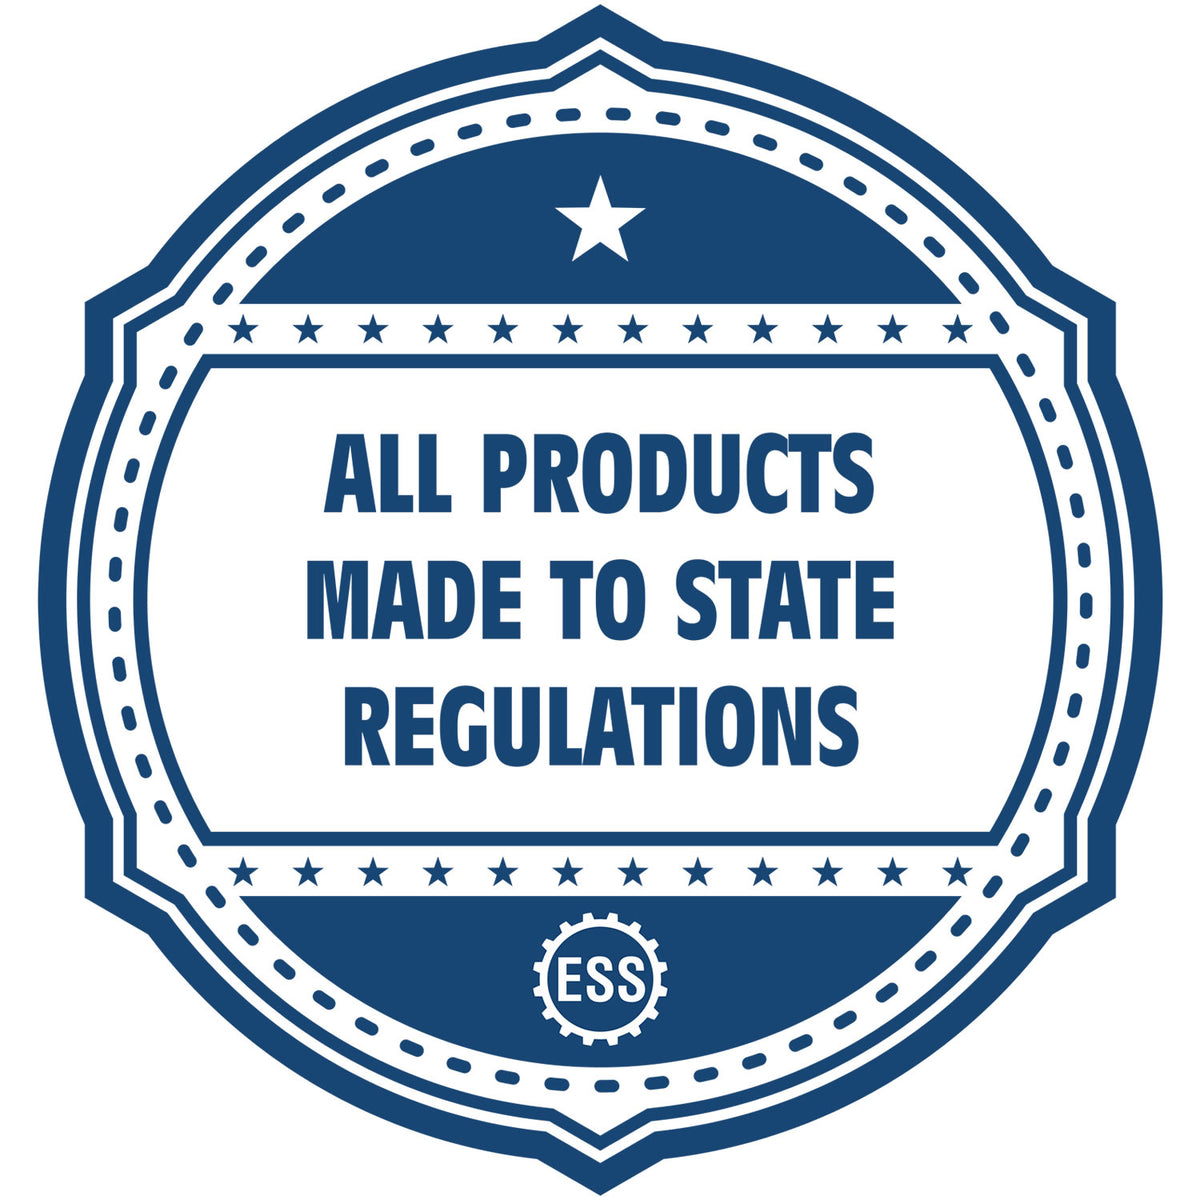 An icon or badge element for the Alabama Engineer Desk Seal showing that this product is made in compliance with state regulations.